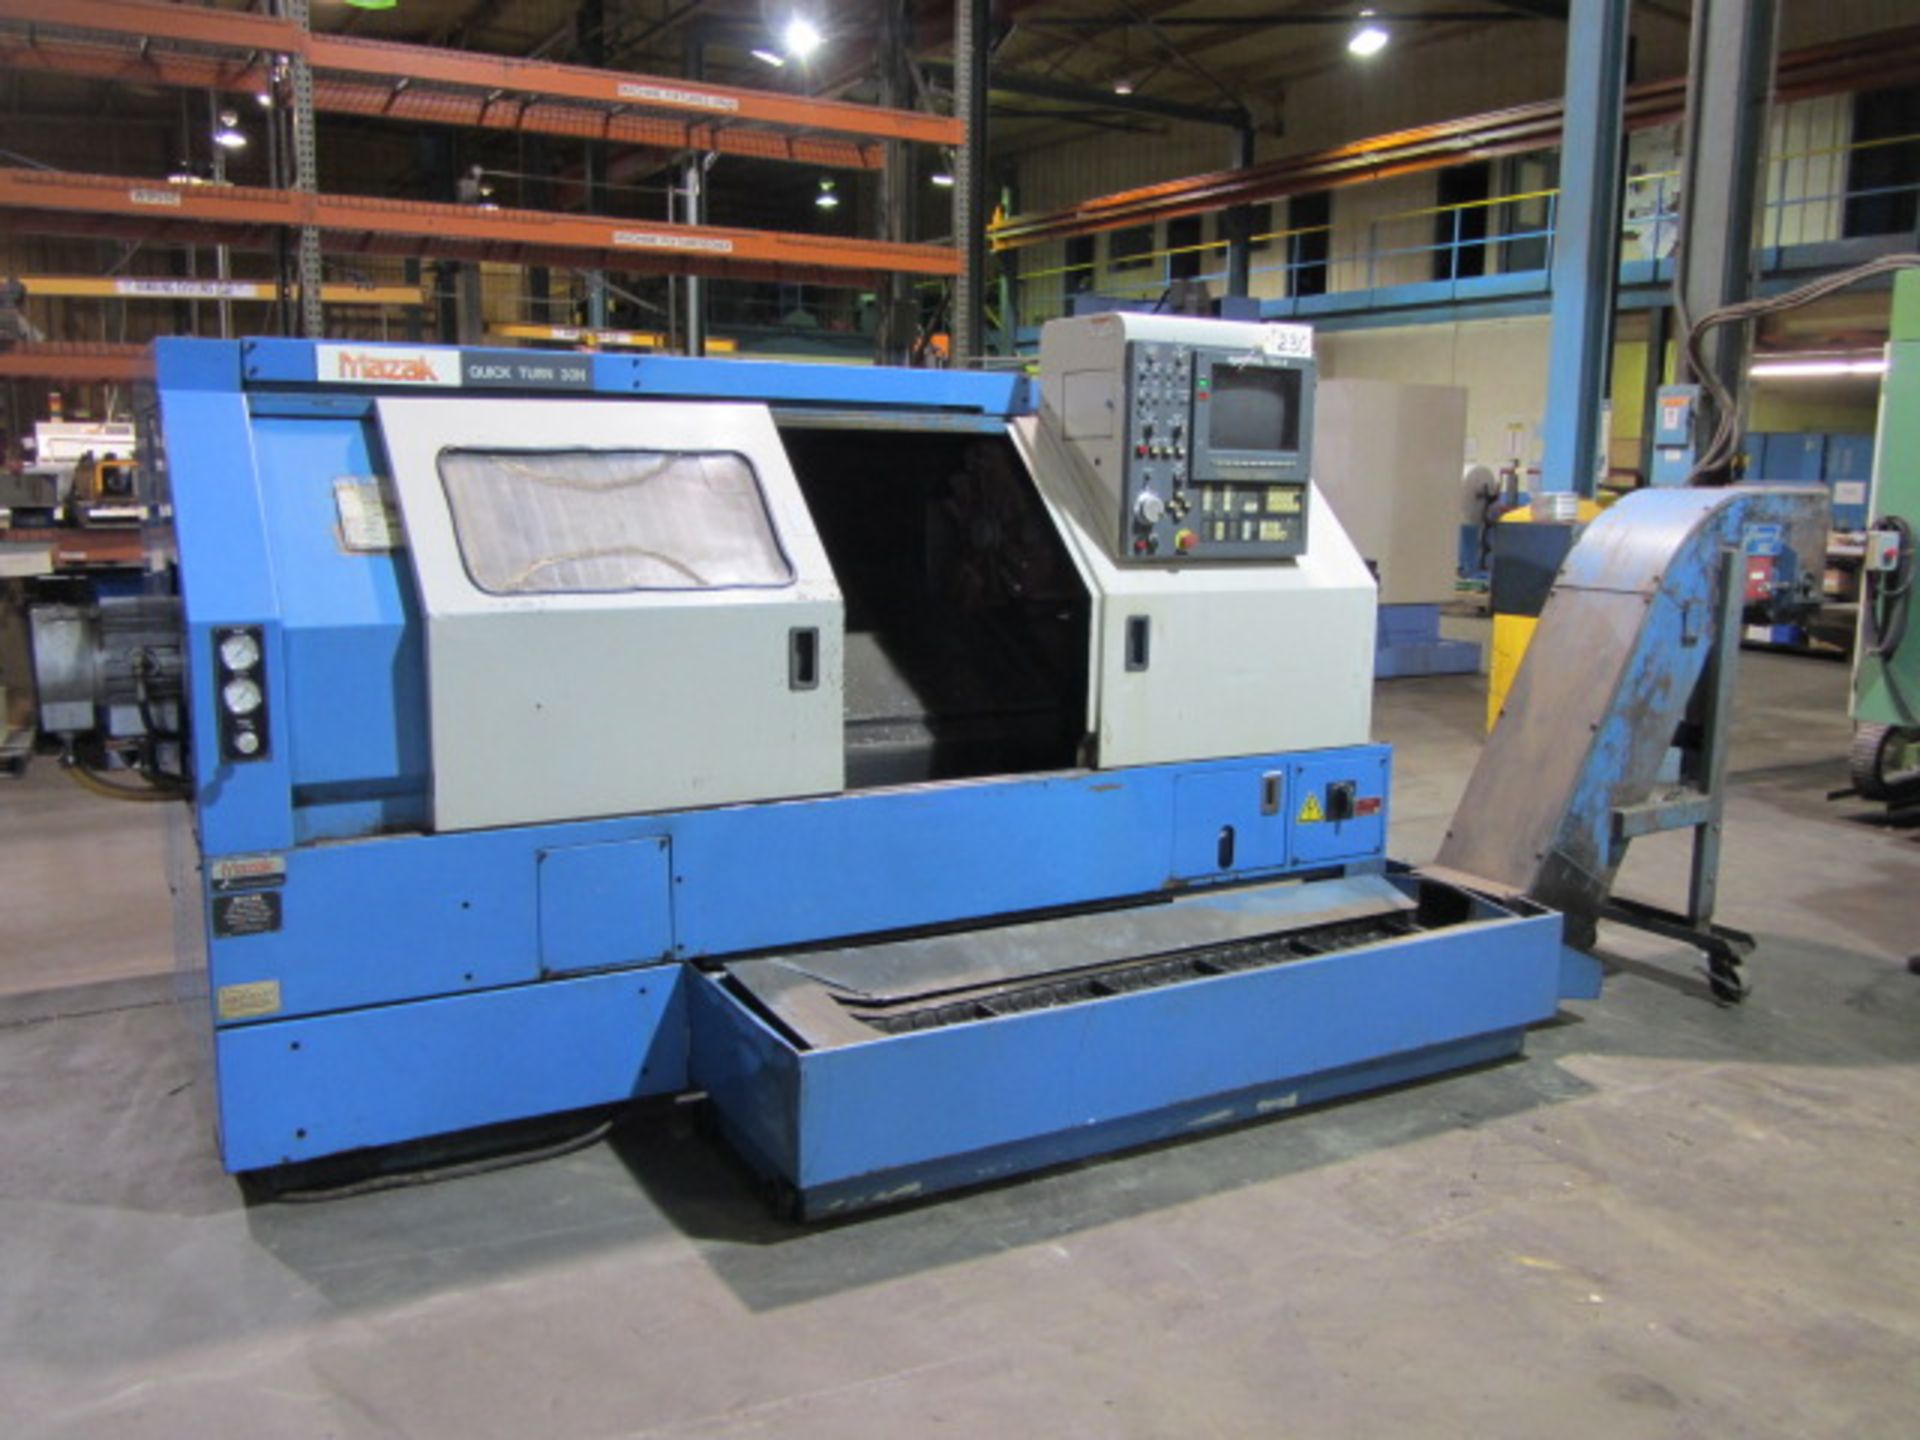 Mazak Model QT30N CNC Turning Center with 12'' 3-Jaw Power Chuck, 36'' Centers, Touch Probe, 8